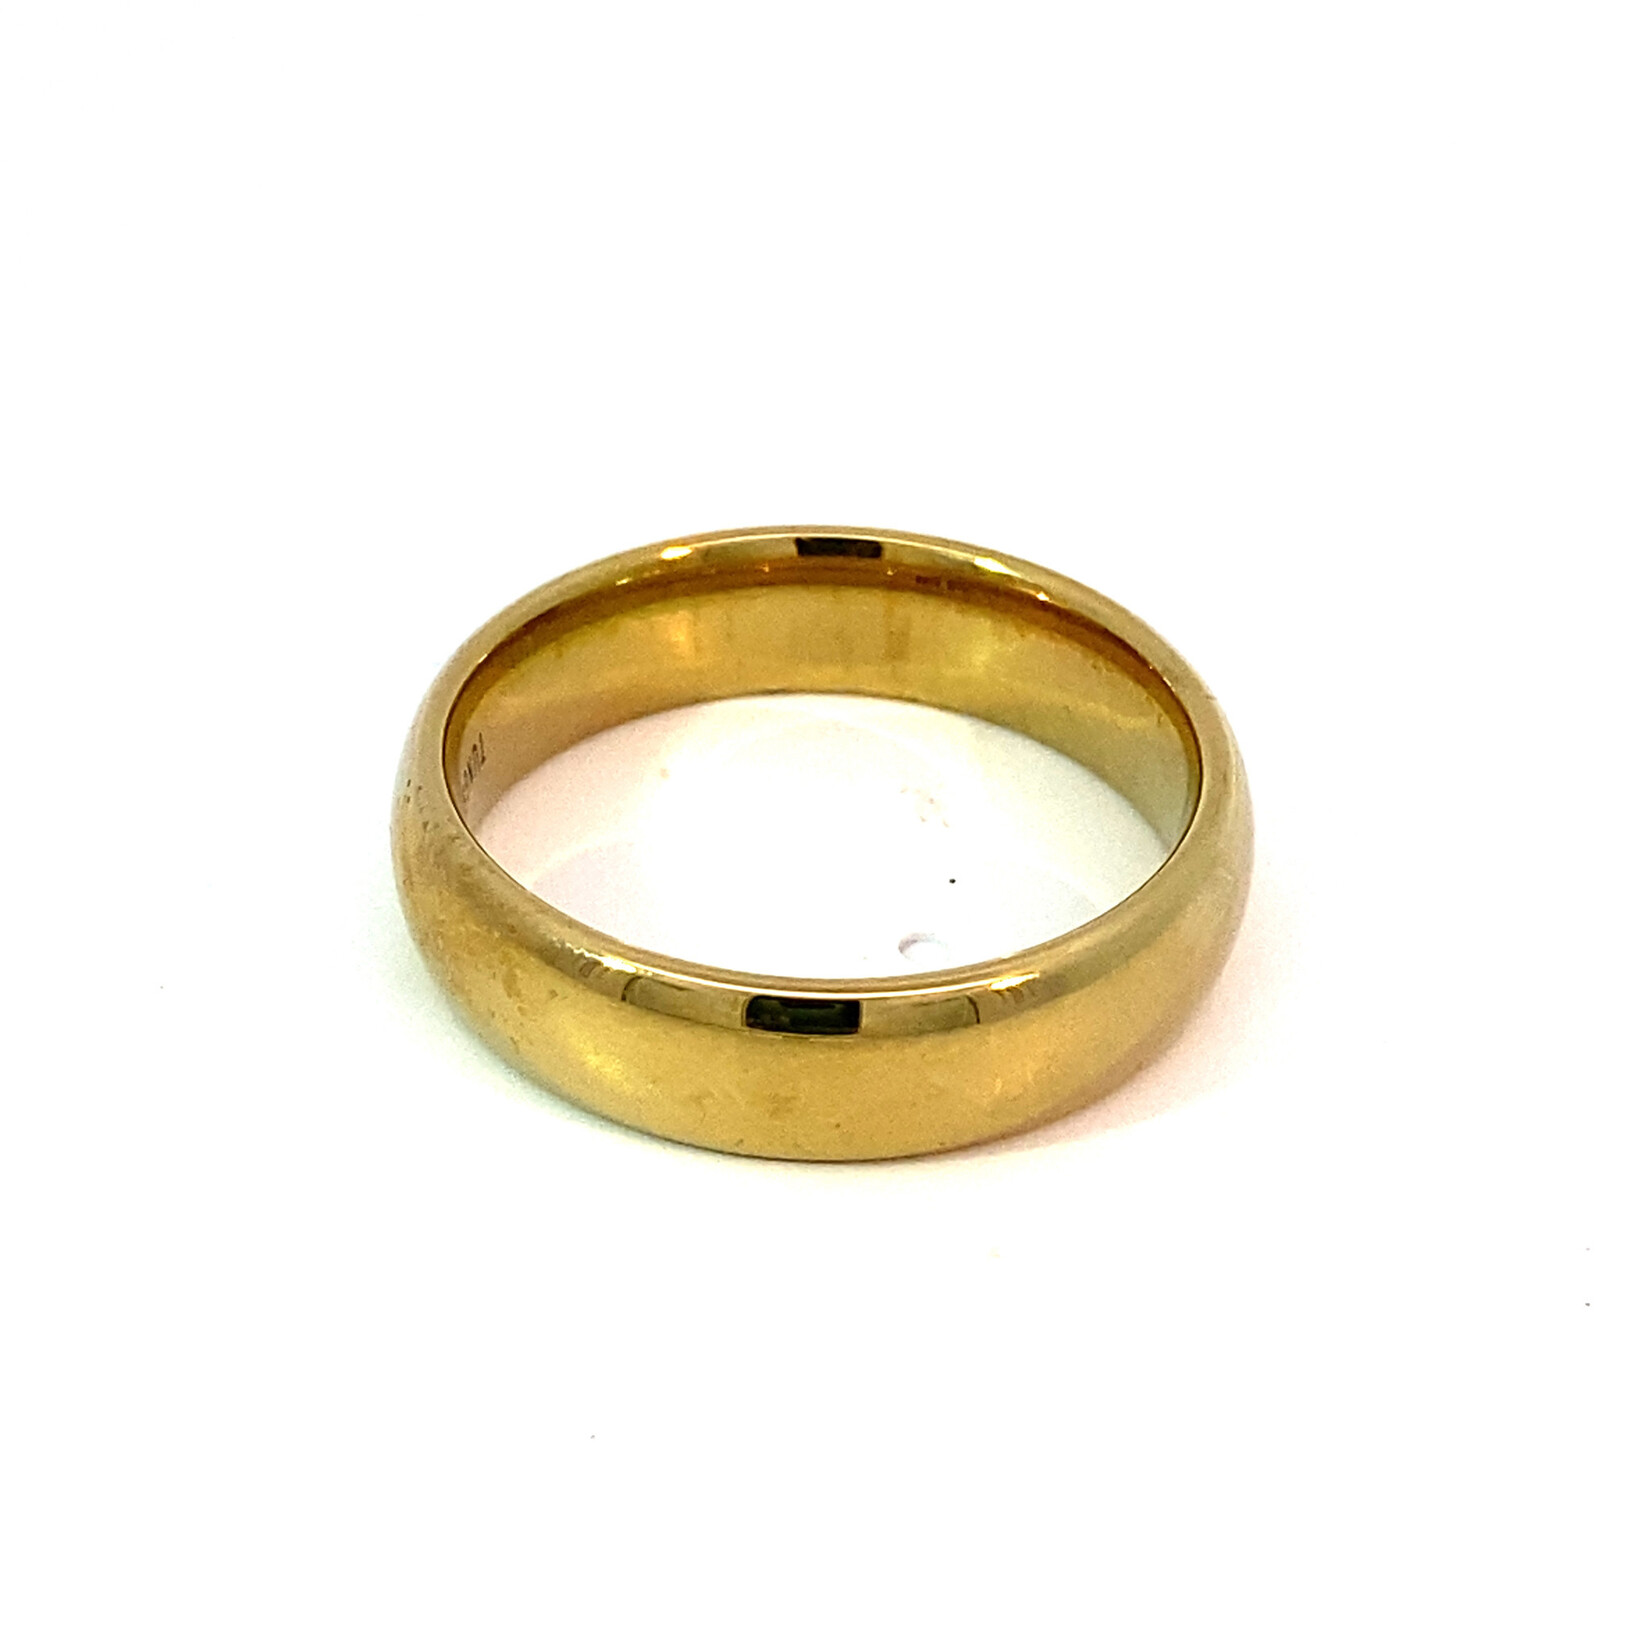 6mm Plated Tungsten ring size 11.5